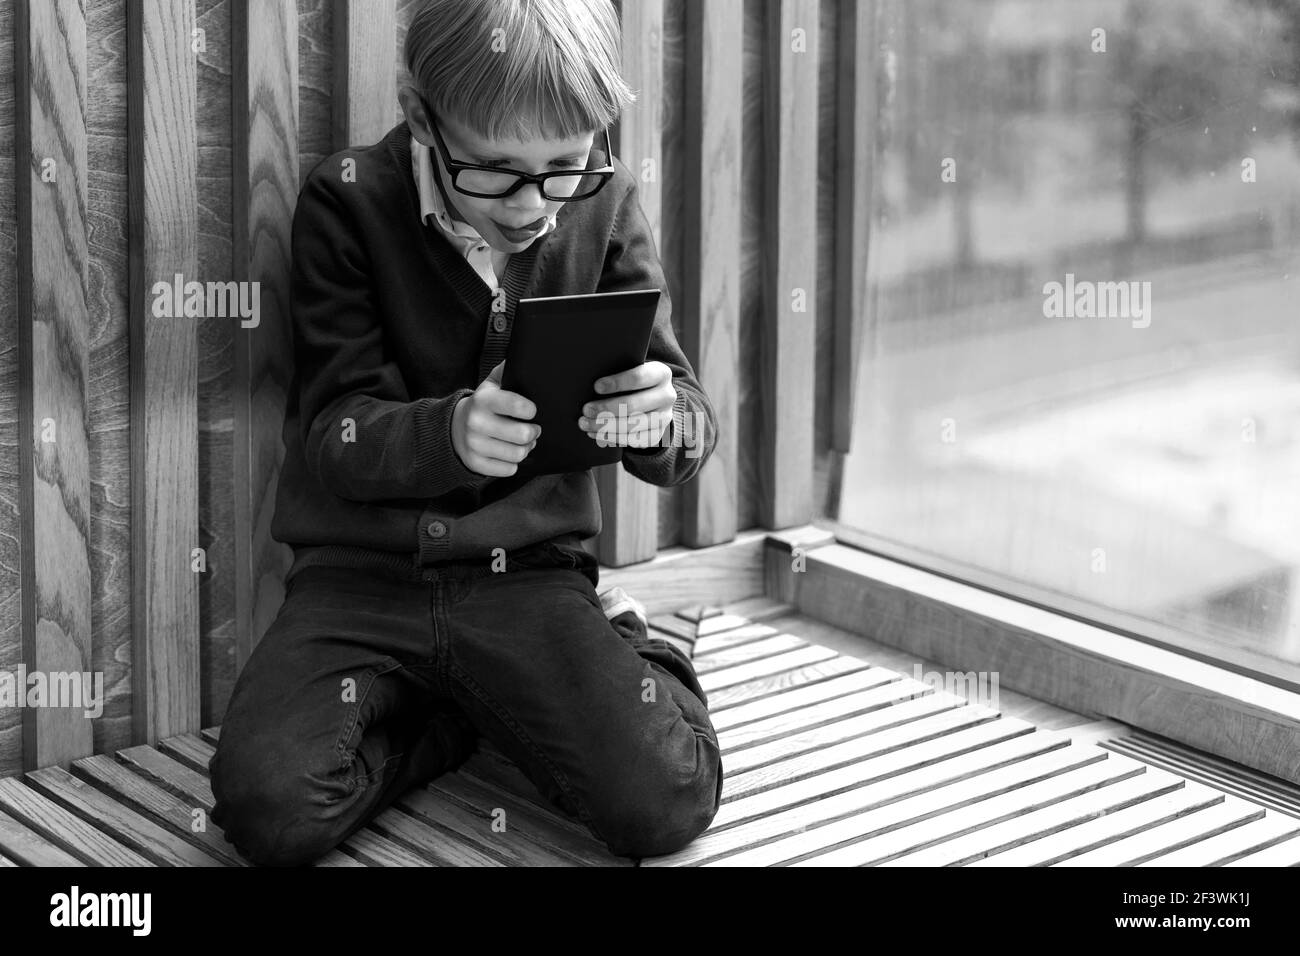 boy 6 years old plays with enthusiasm look into the tablet. monochrome image Stock Photo